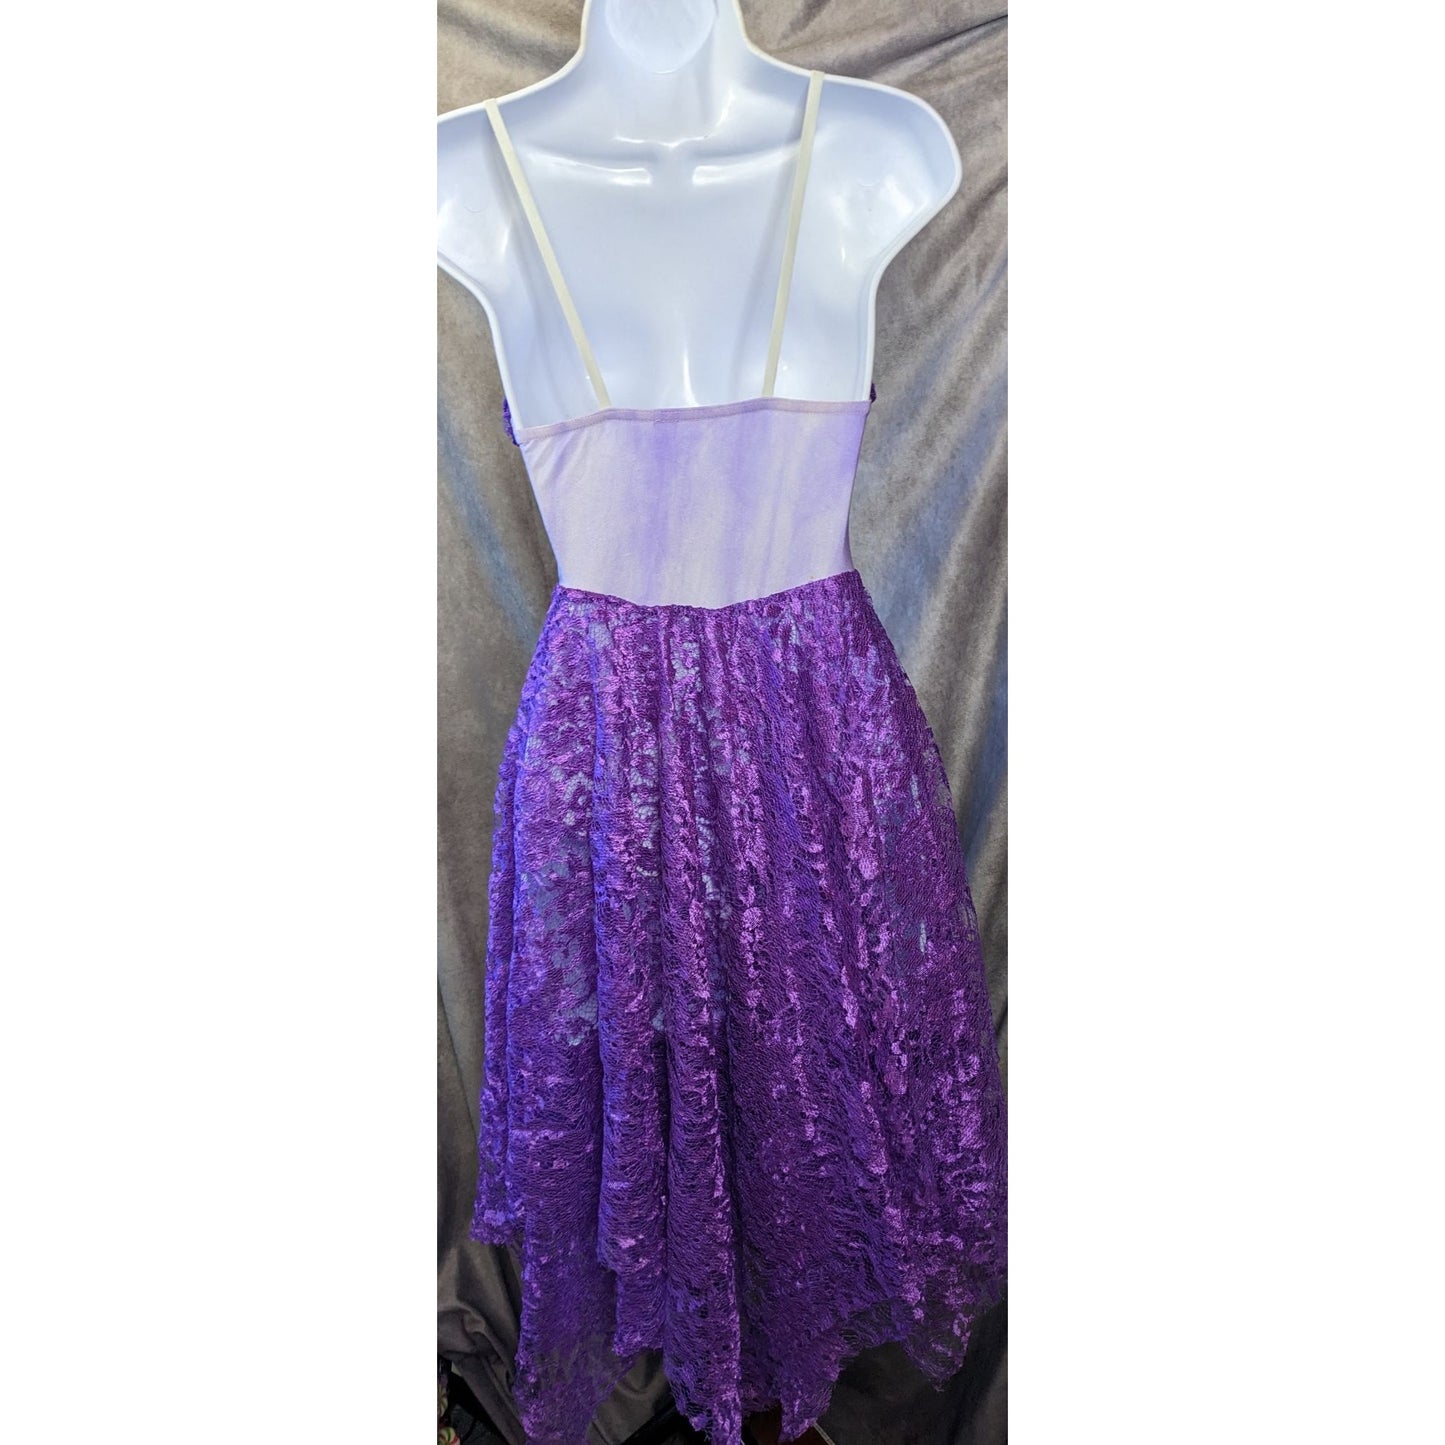 Taffy's Showstoppers Purple Floral Fairy Dance Dress